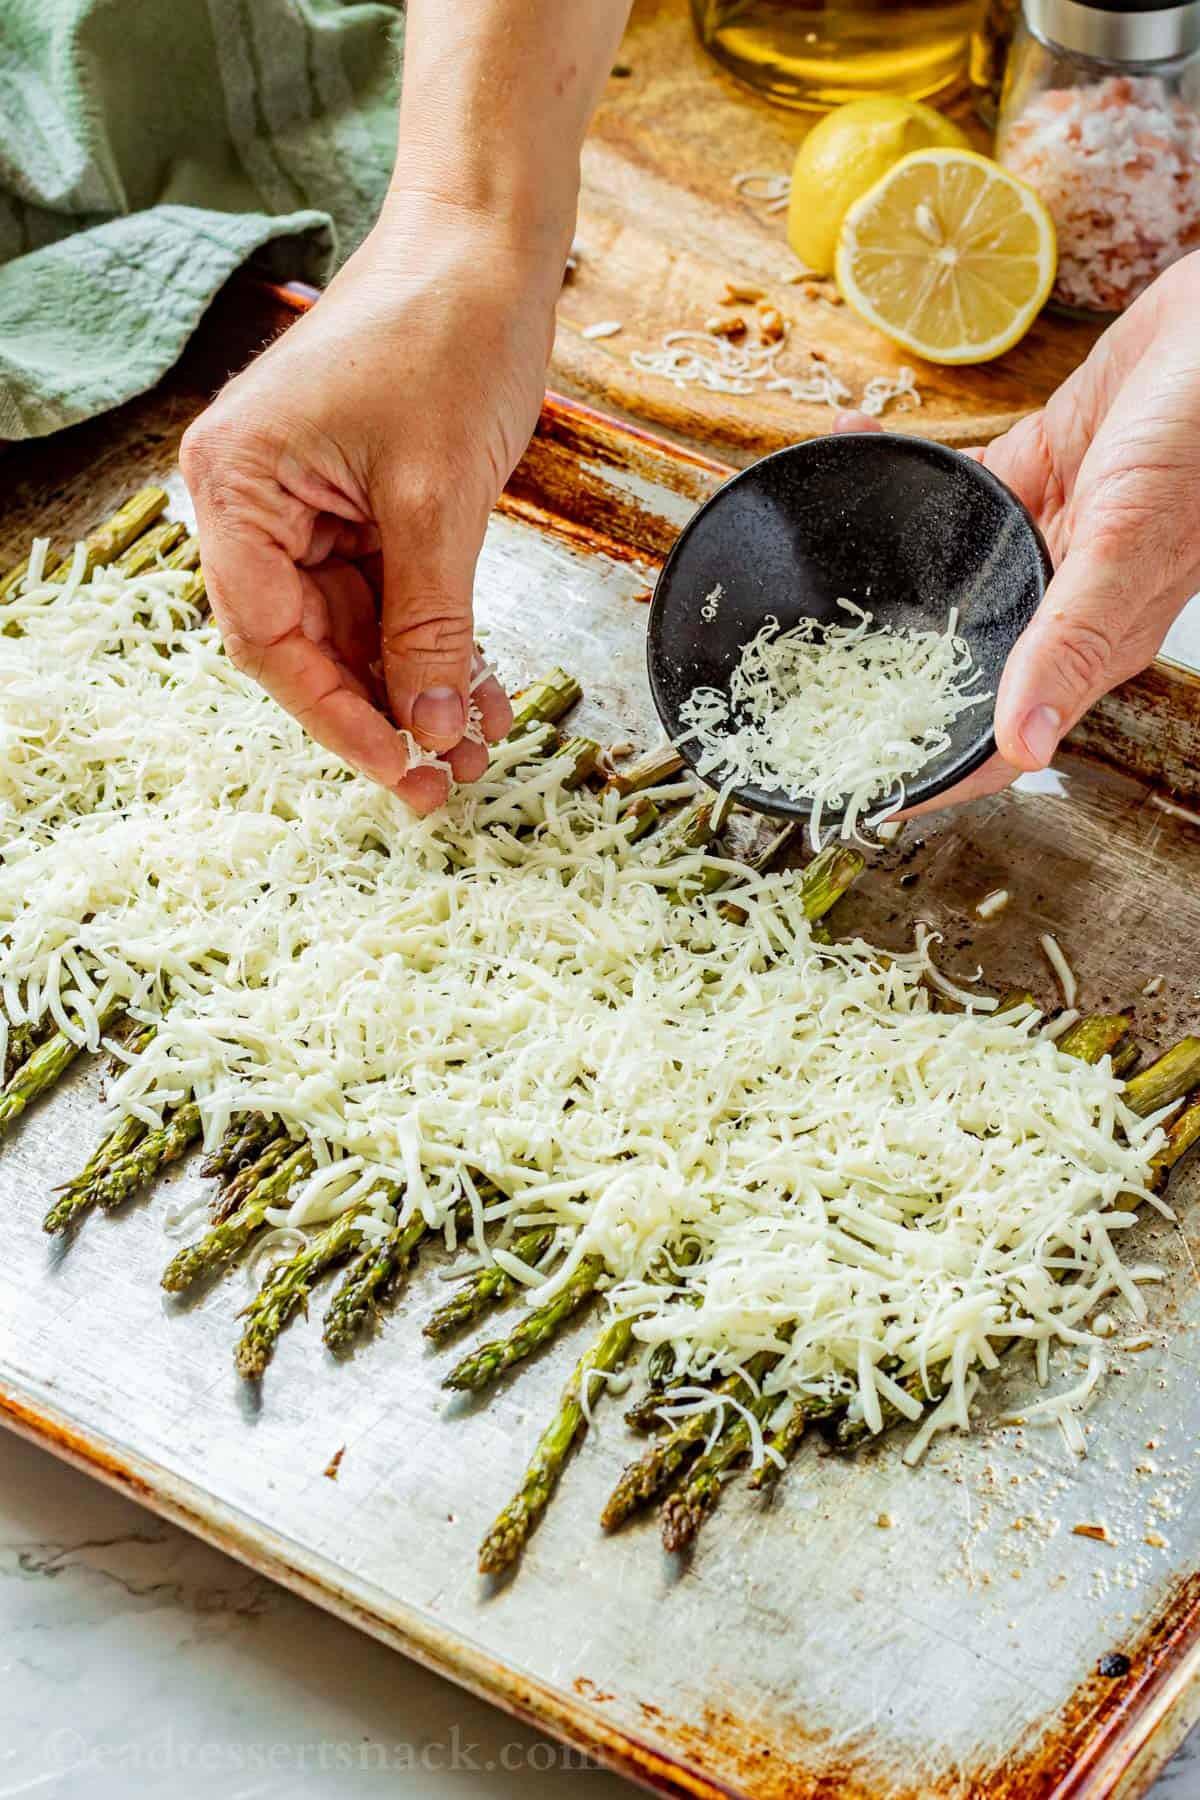 Hand sprinkling cheese over baked asparagus on metal pan.